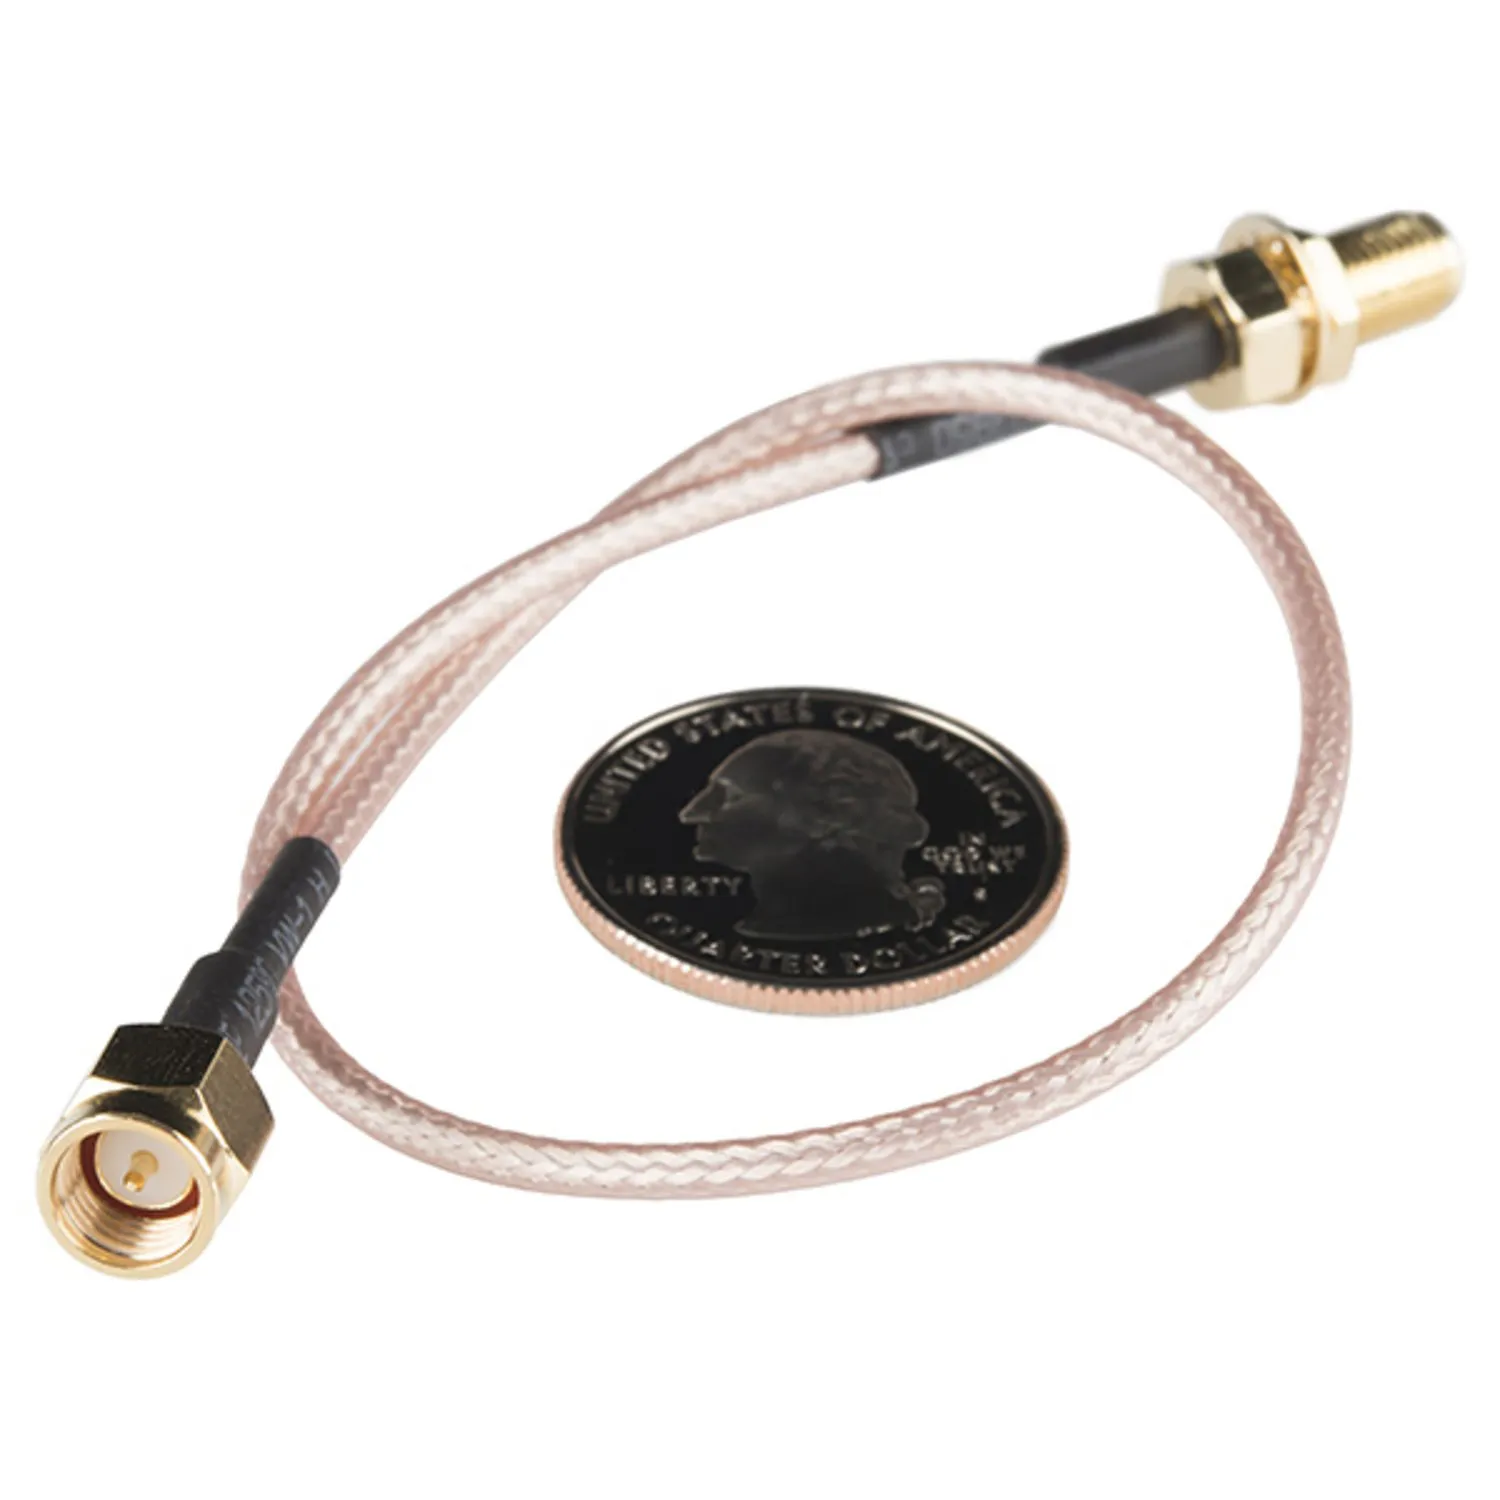 Photo of Interface Cable - SMA Female to SMA Male (25cm)